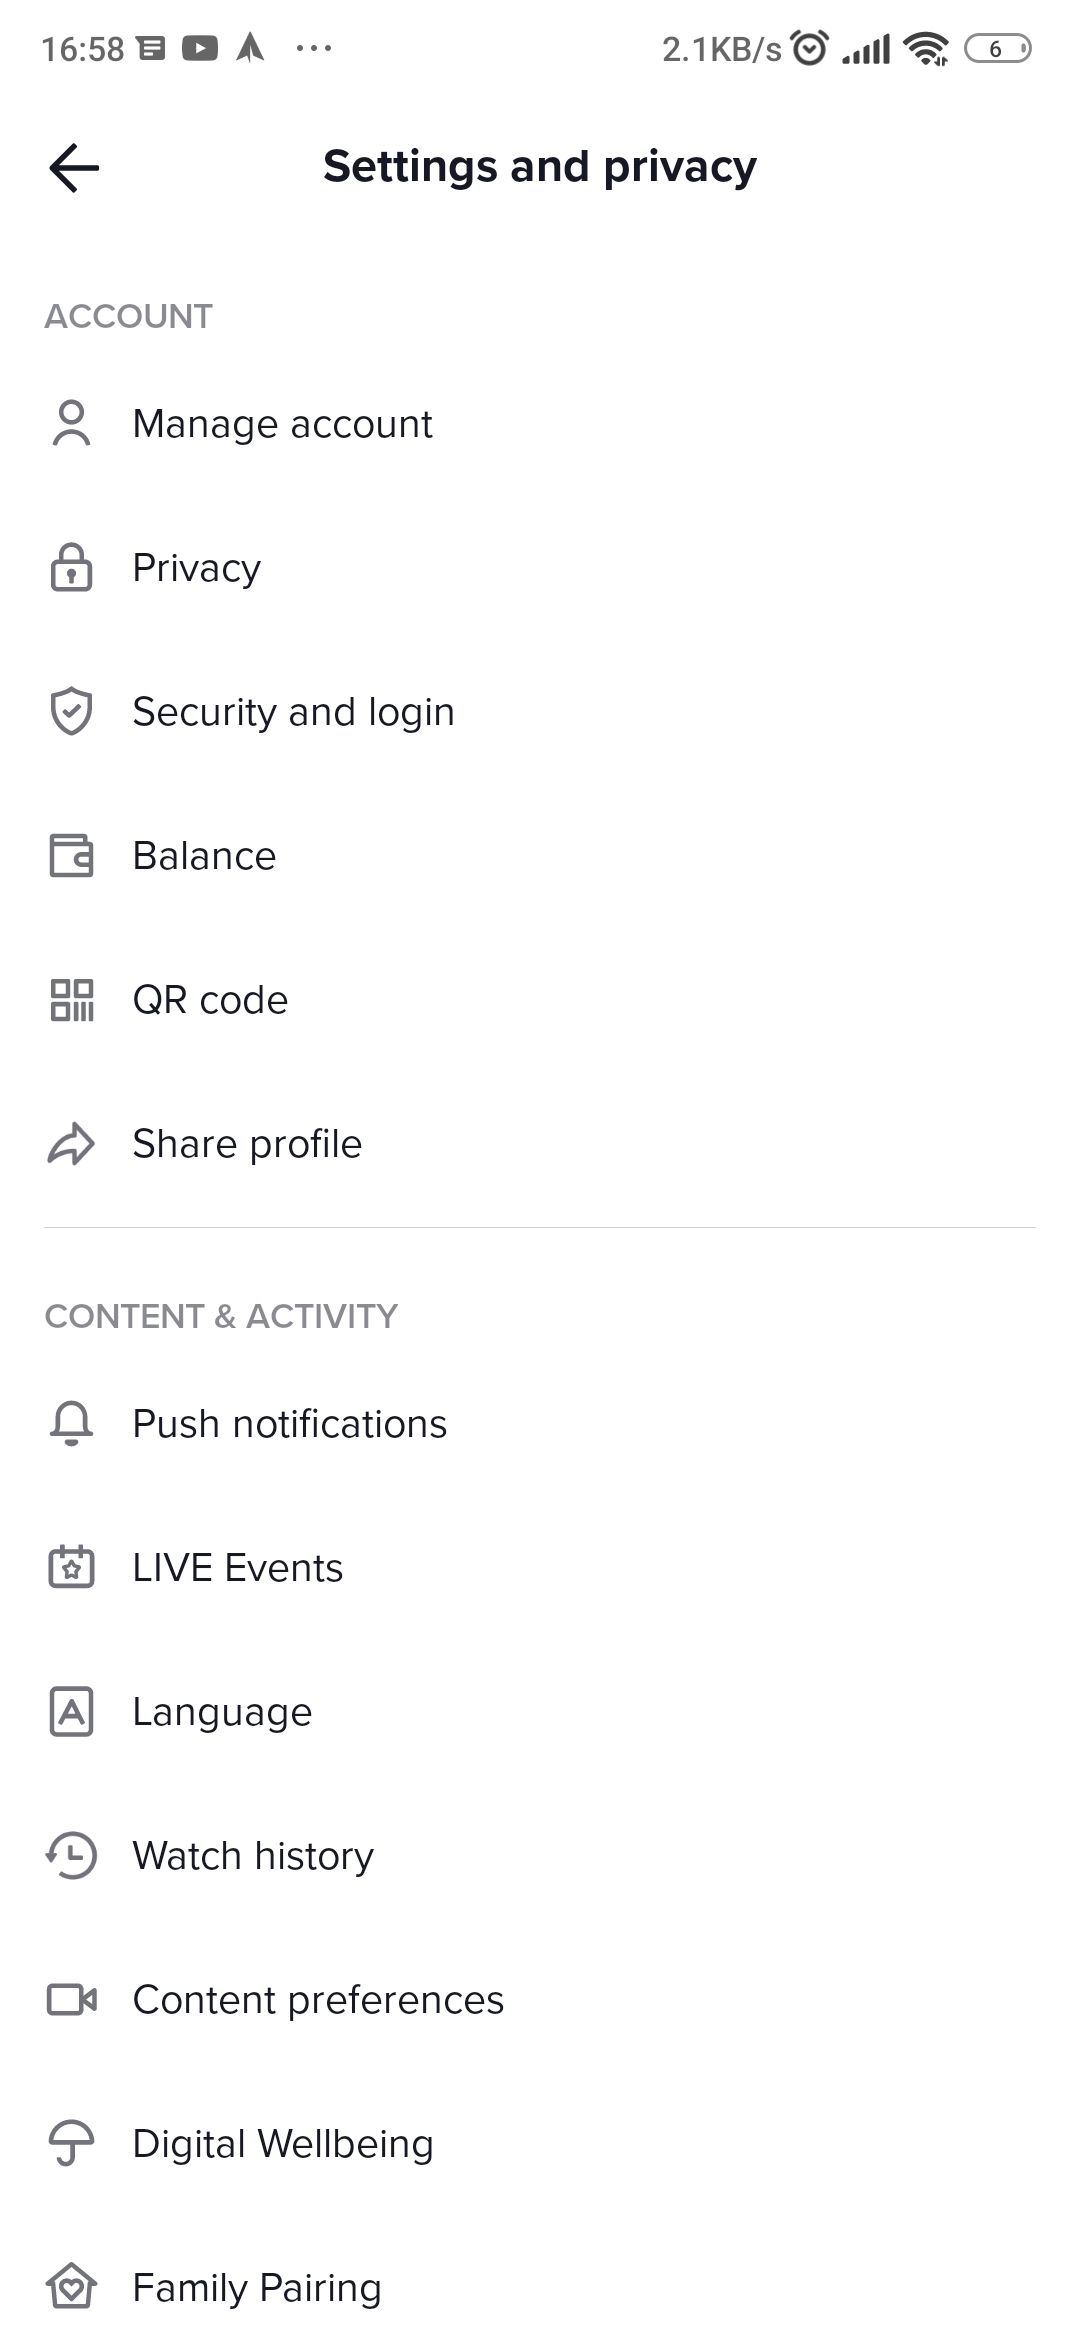 TikTok's Settings and Privacy page